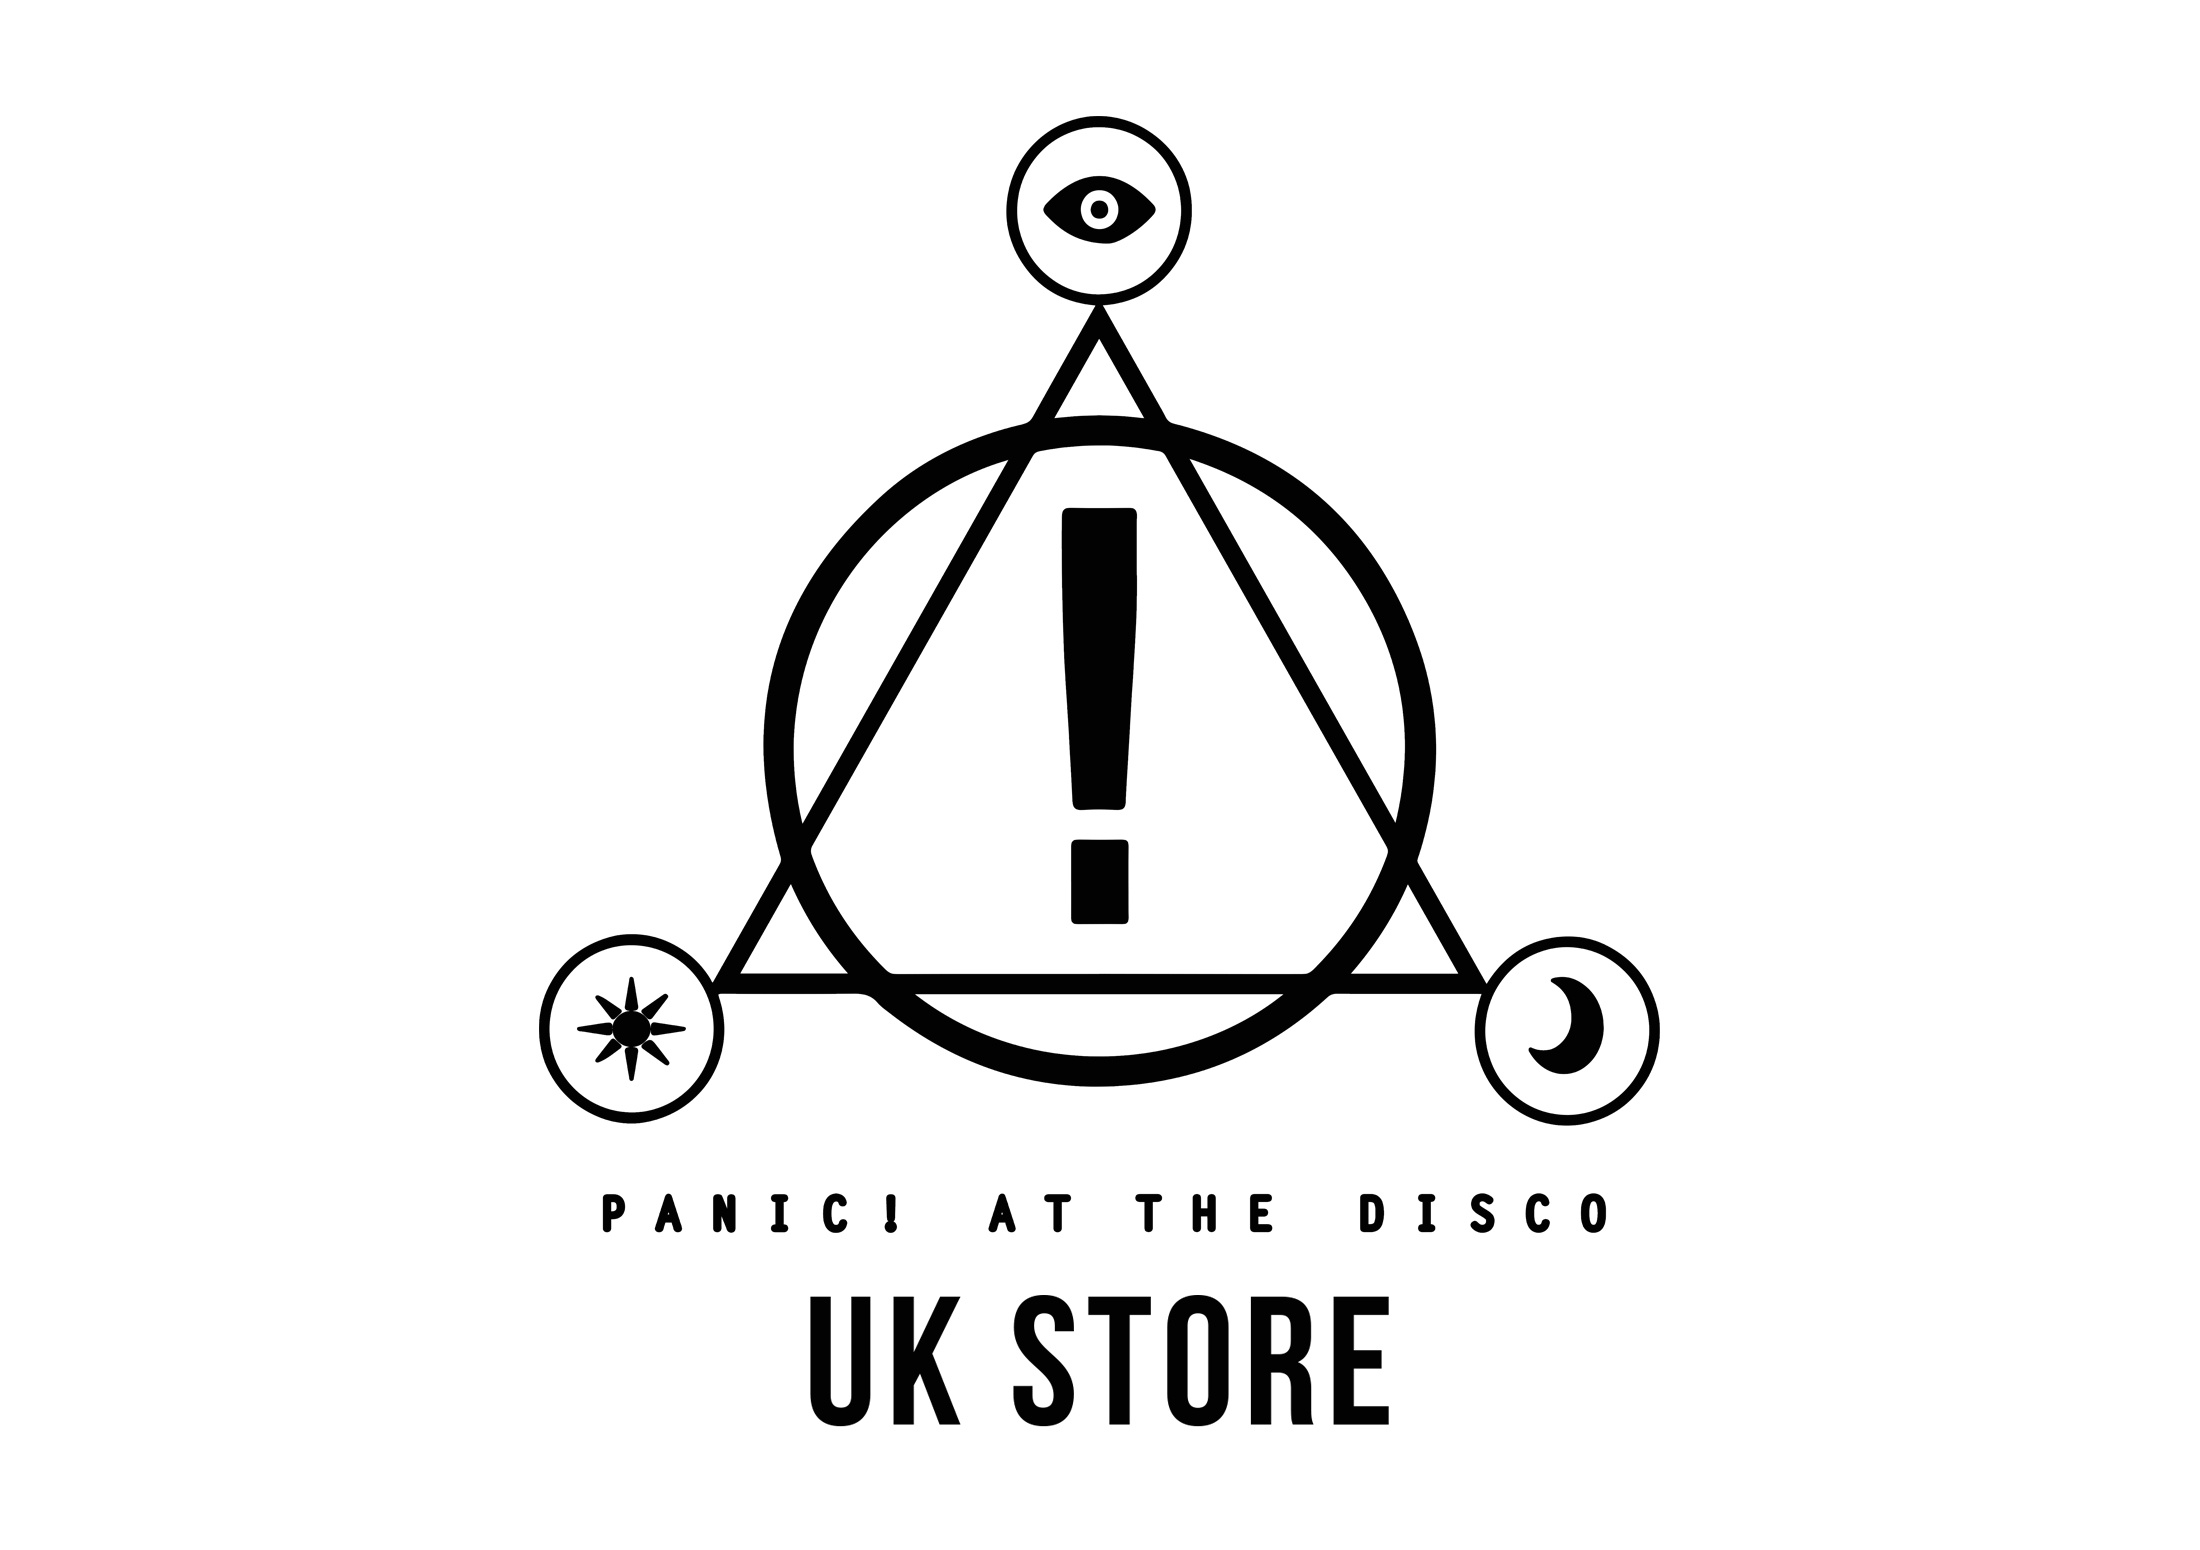 Panic! at the Disco logo, Symbol meaning, Brand history, Recognizable identity, 2200x1550 HD Desktop